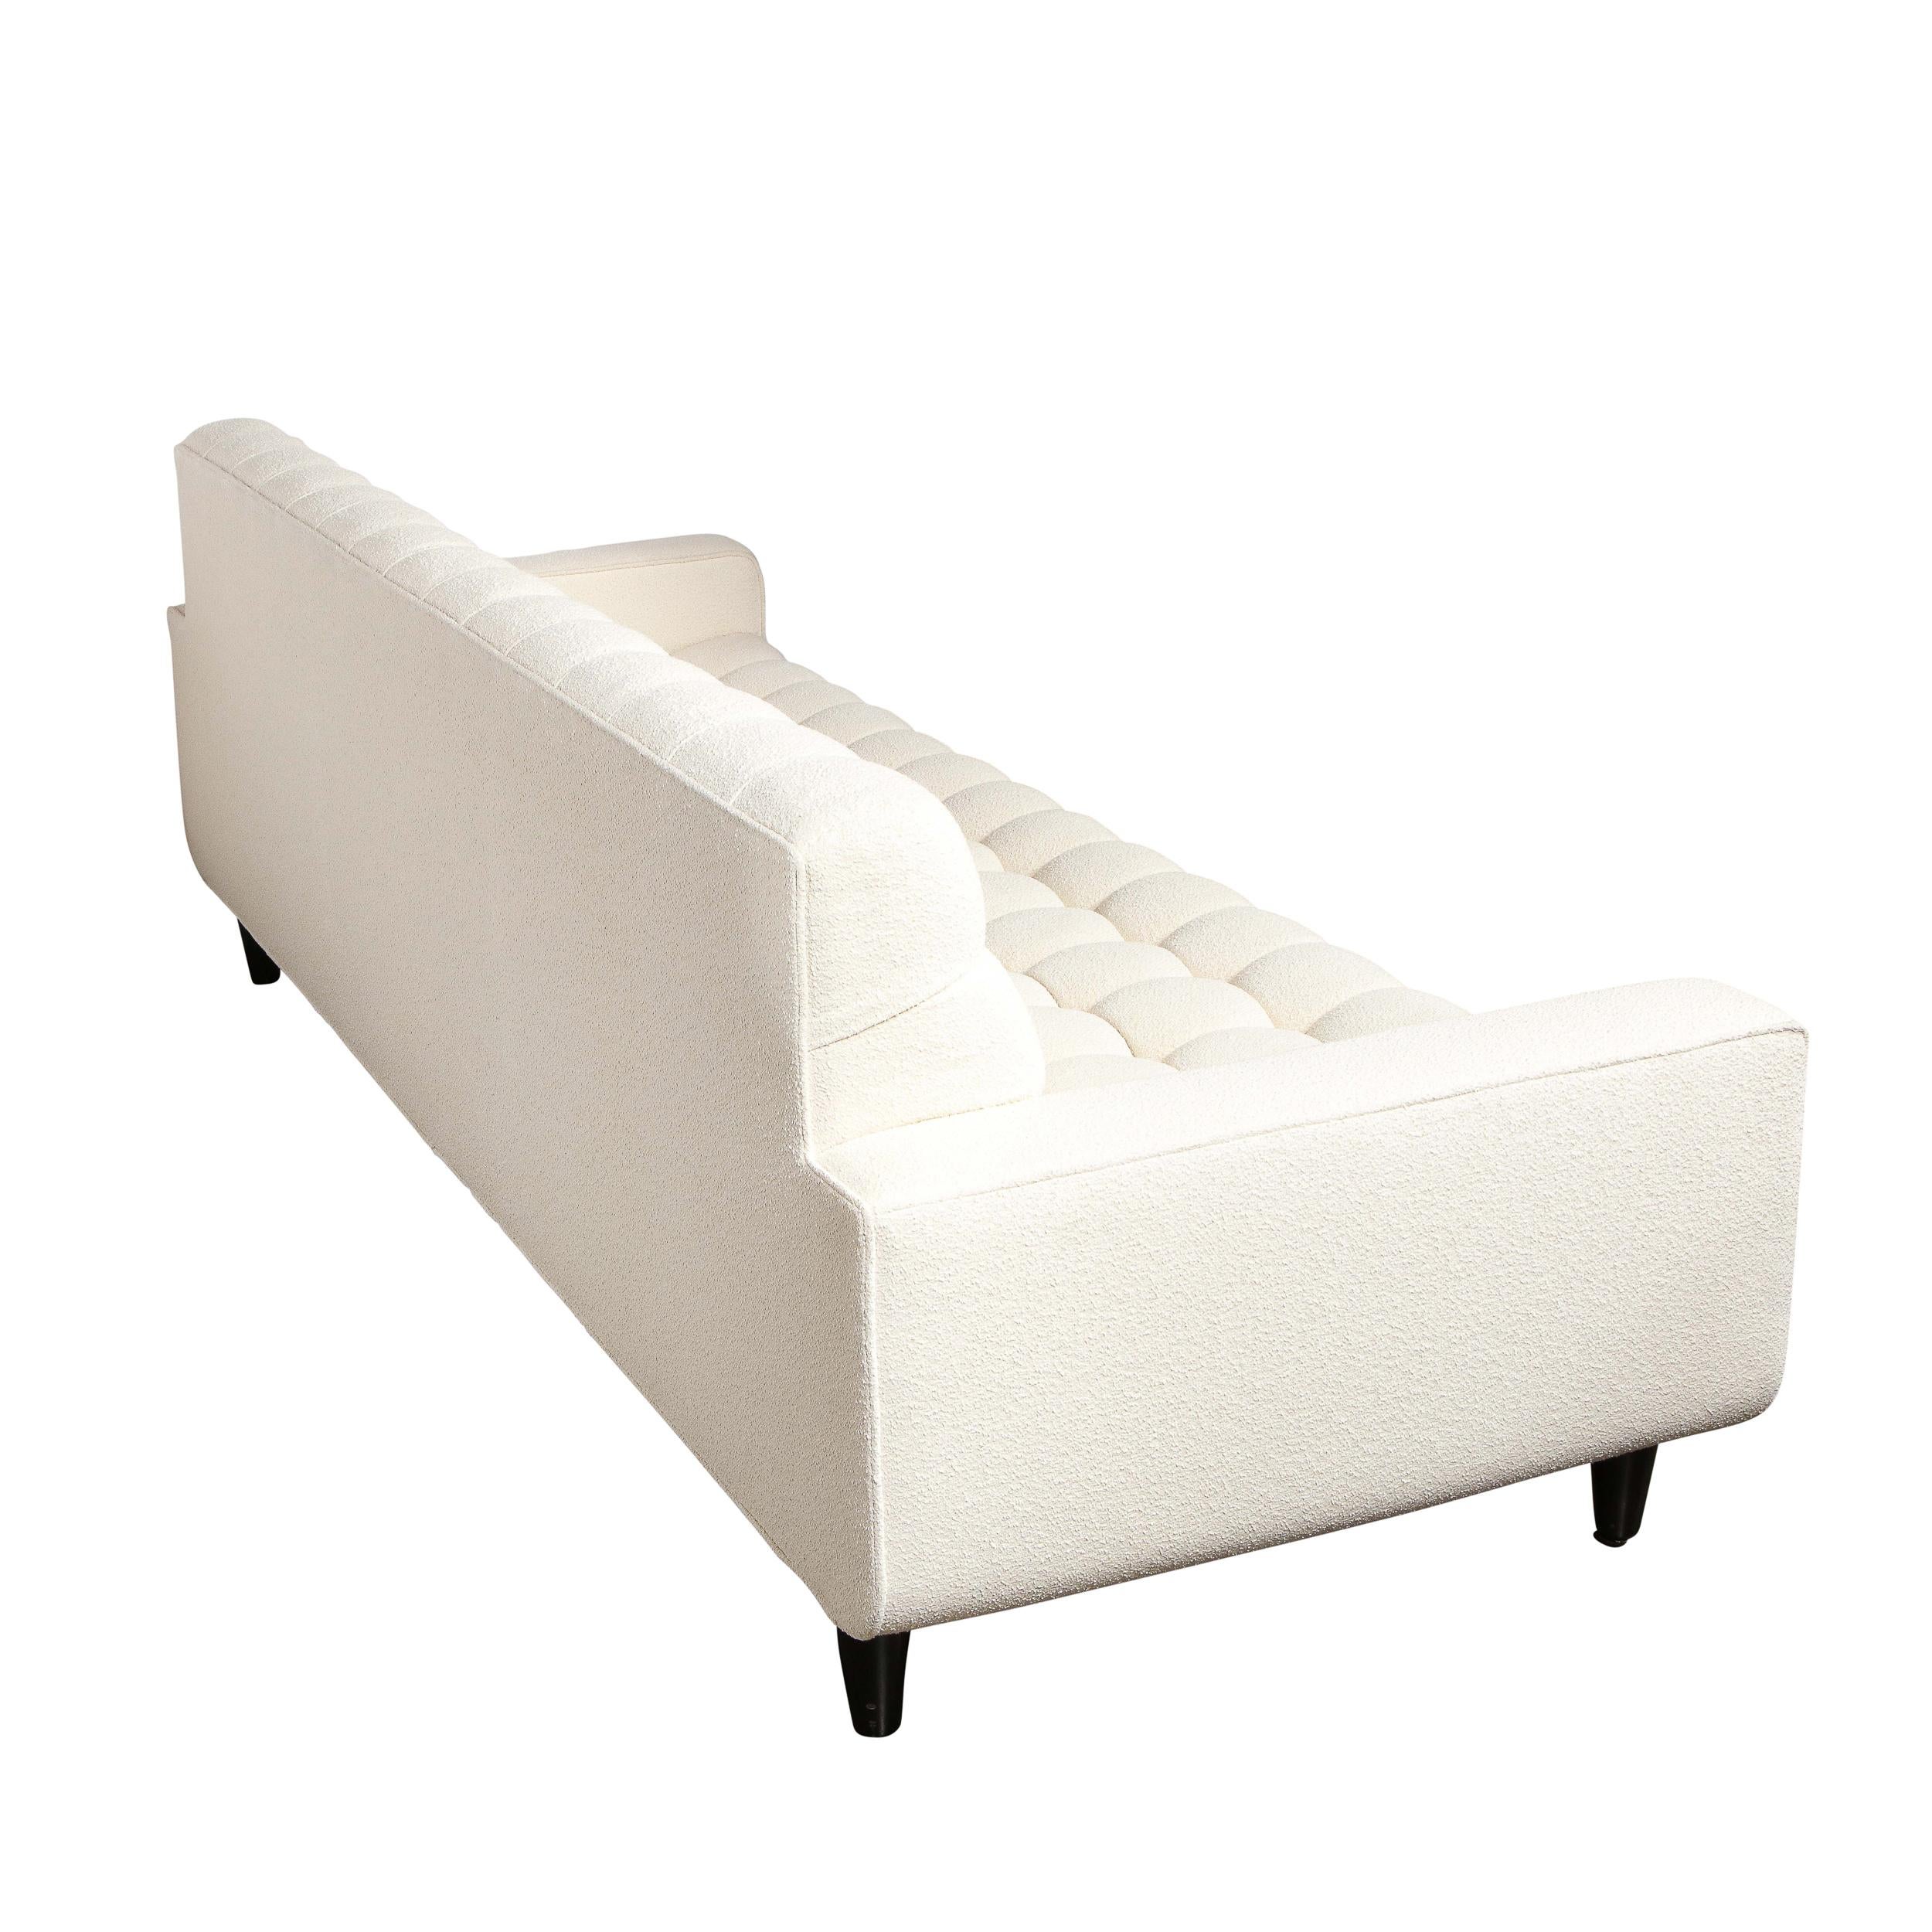 Mid-Century Modern Biscuit Tufted Sofa by Billy Haines in Cream Bouclé Fabric 1